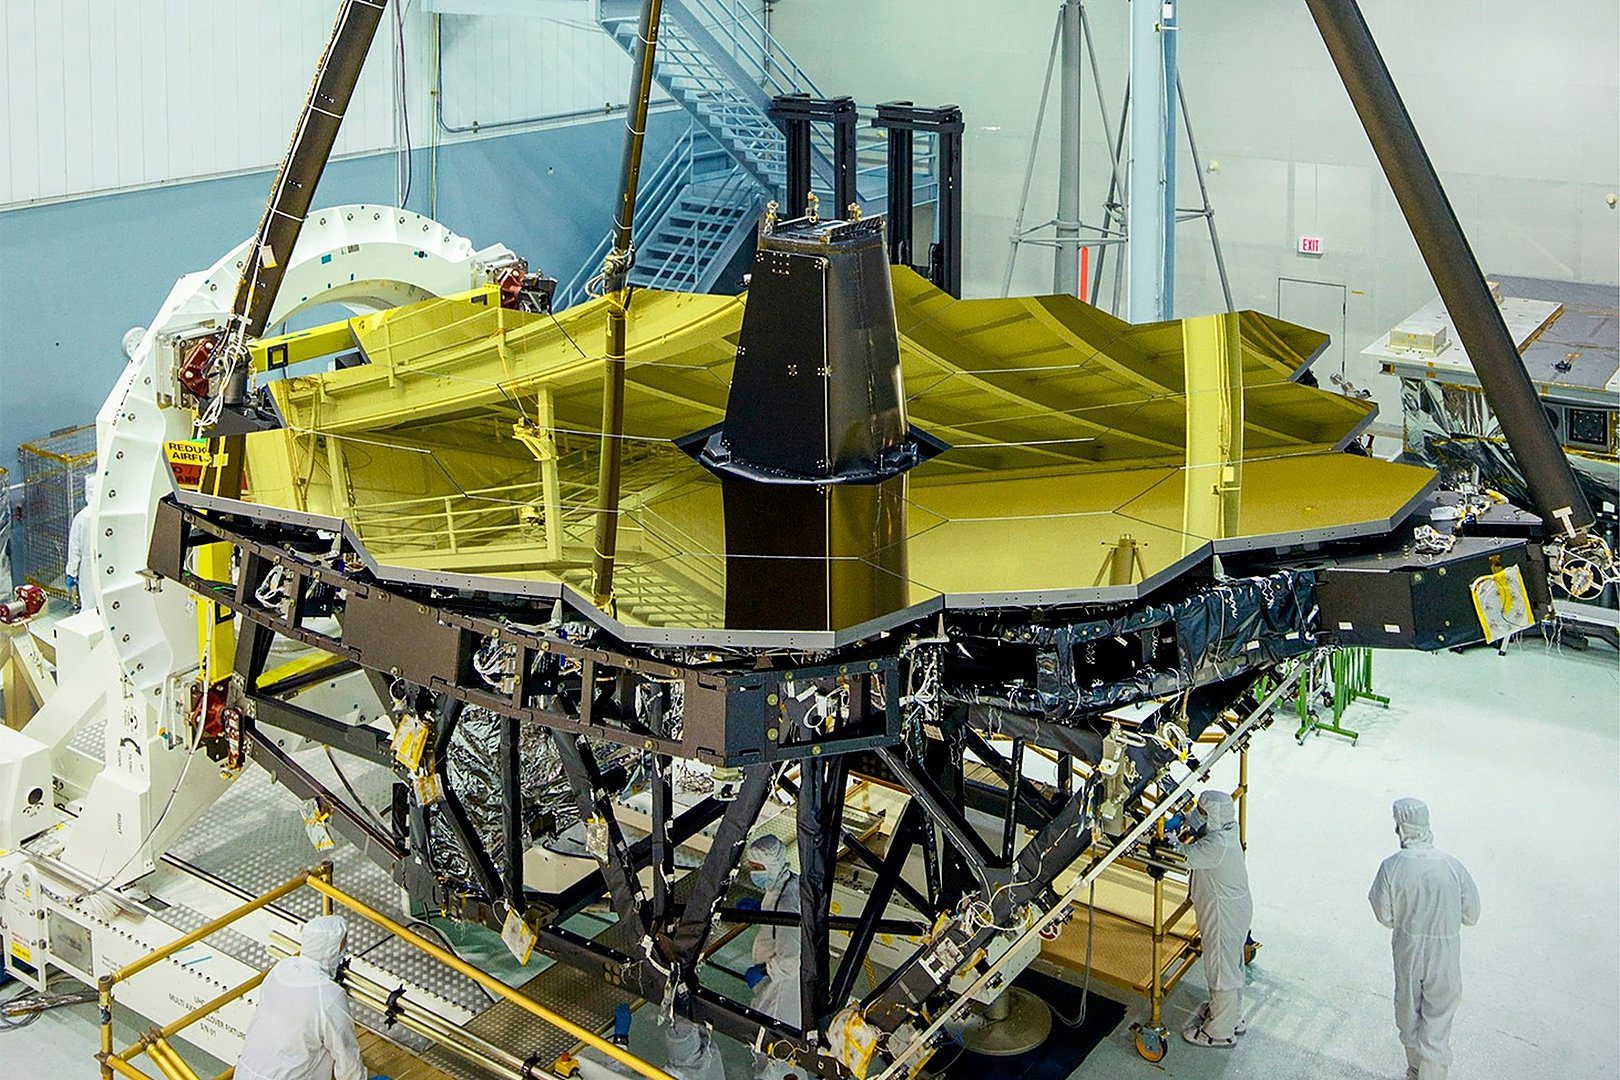 The James Webb Space Telescope (JWST) has been in the making for nearly two decades and is the largest space telescope assembled till present.